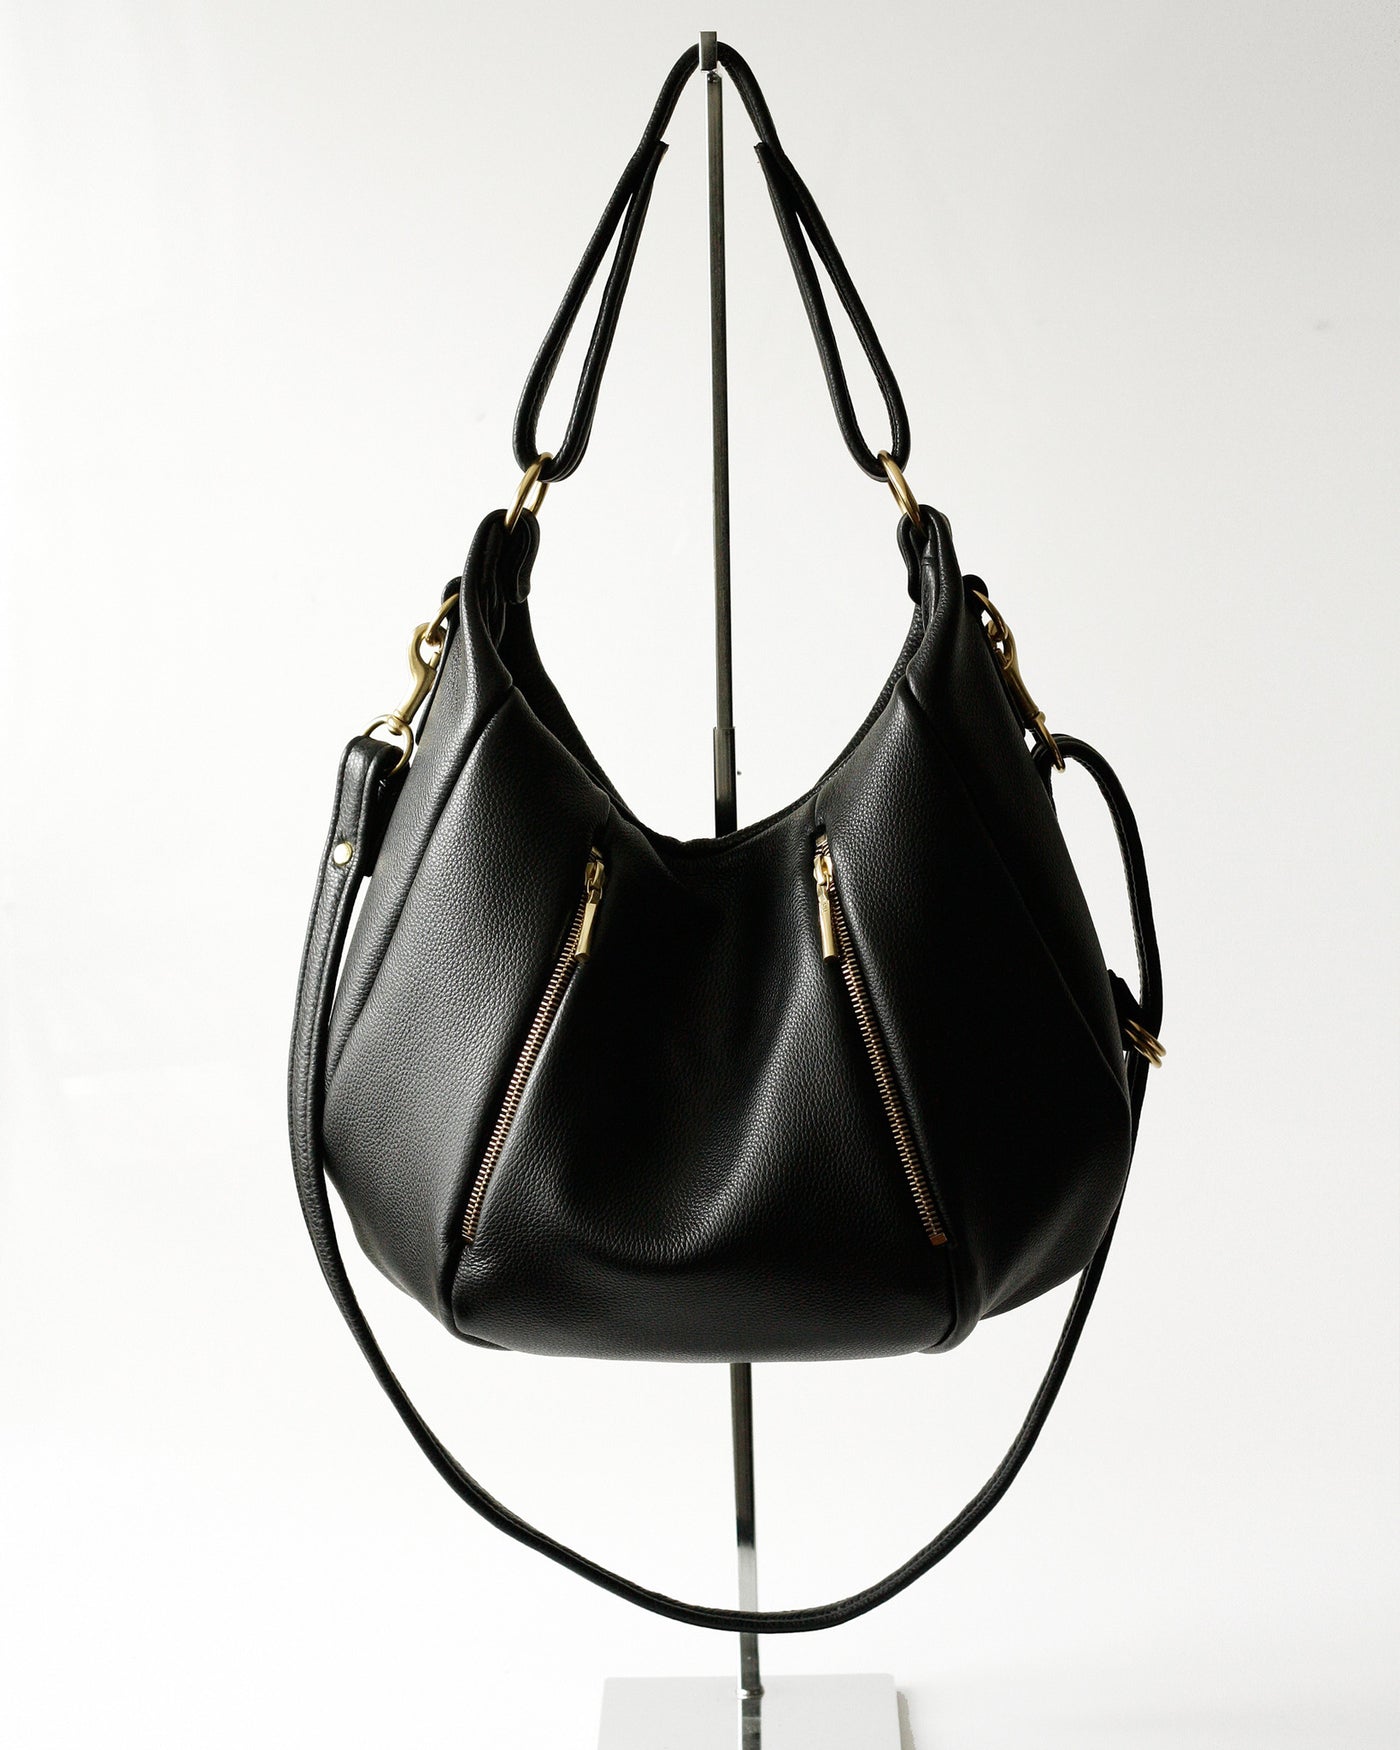 Ballet - Opelle bag Permanent Collection - Opelle leather handbag handcrafted leather bag toronto Canada